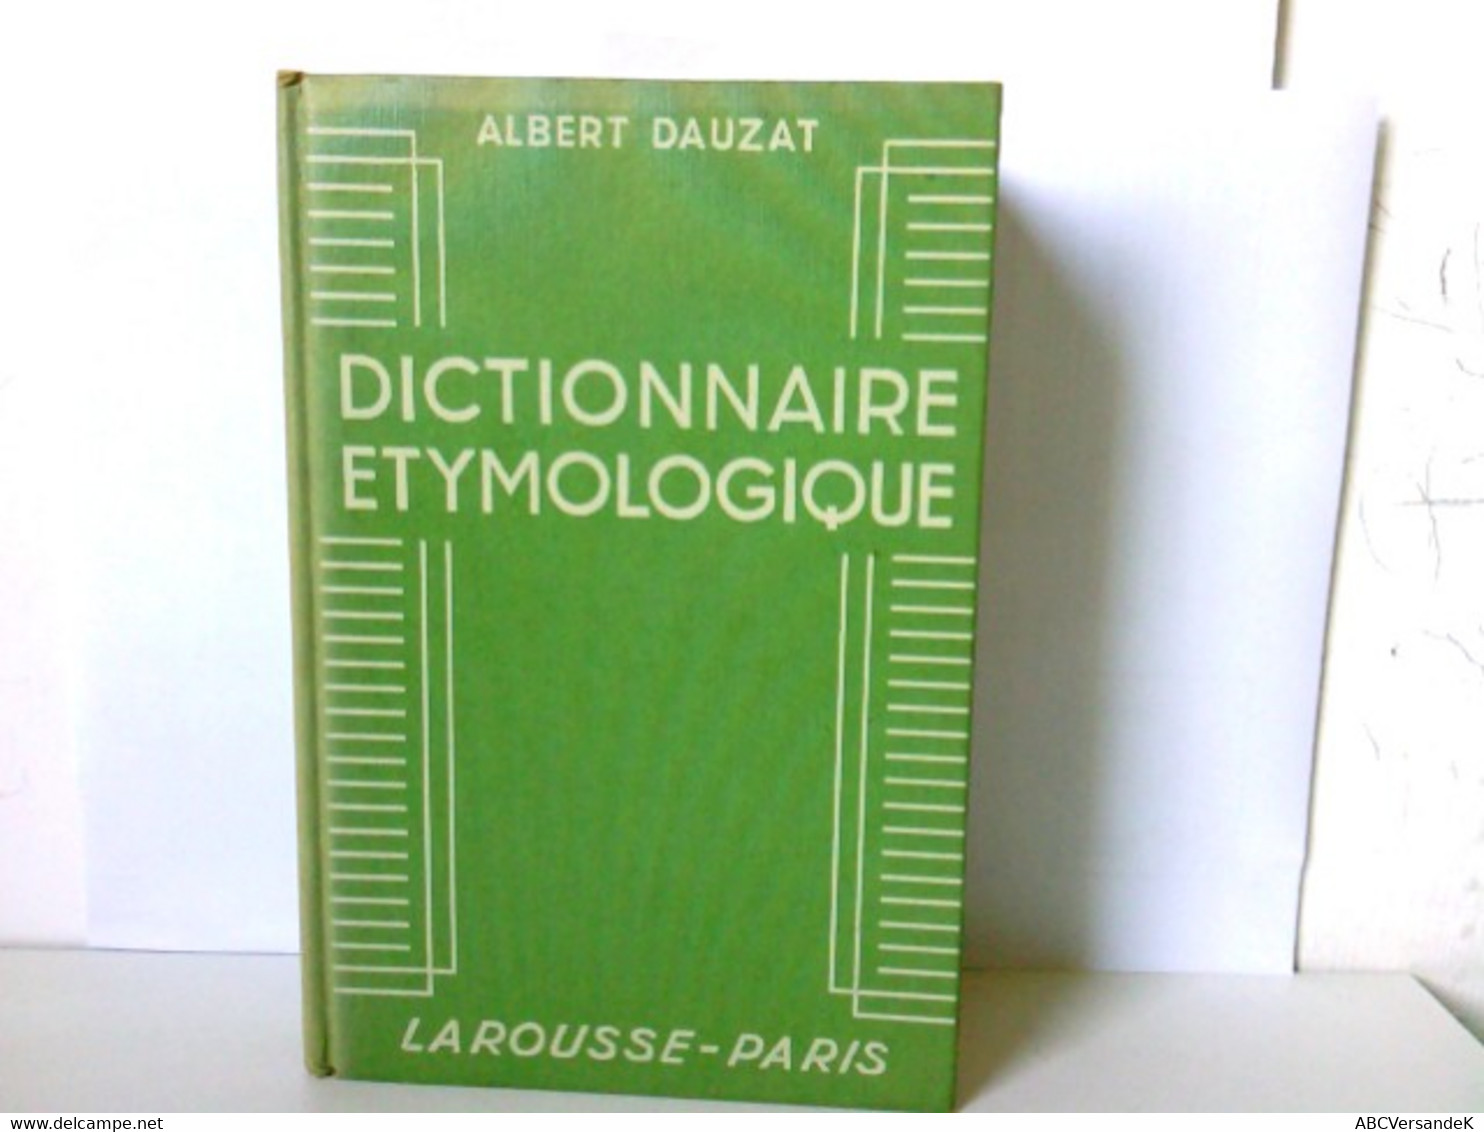 Dictionnaire ètymologiquee. - Glossaries